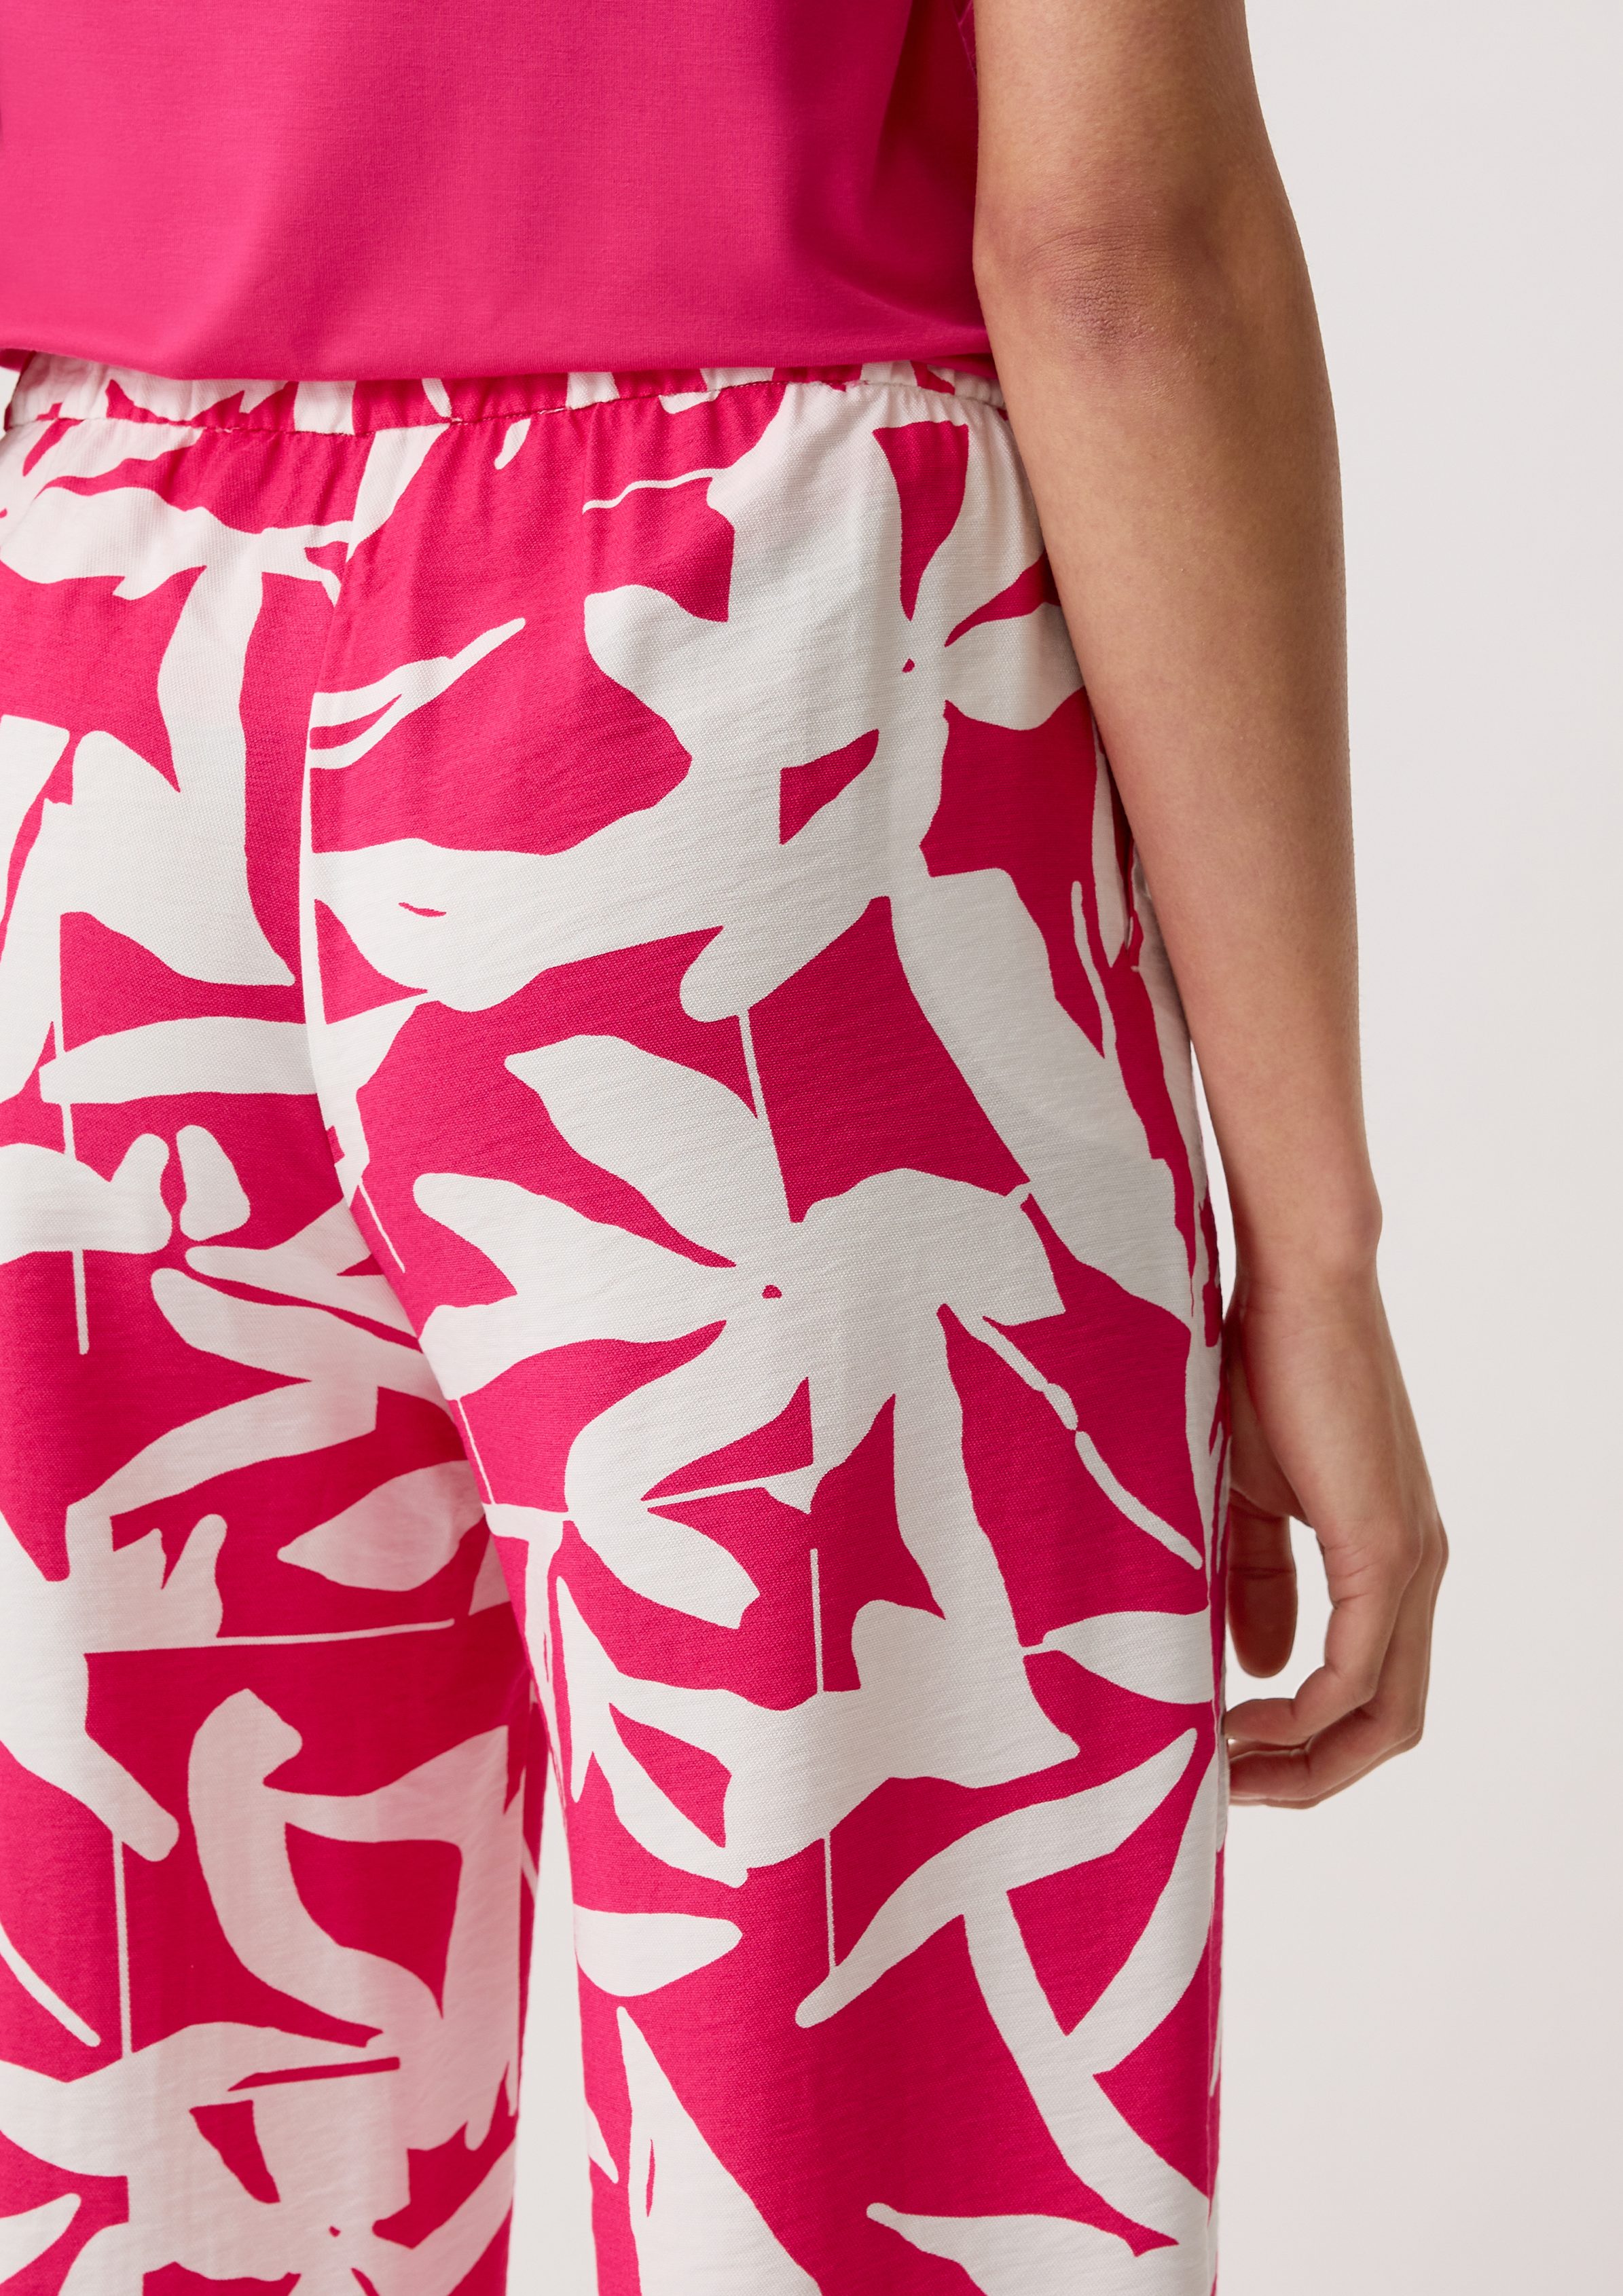 Loose: Allover-Print mit Comma Stoffhose pink Hose